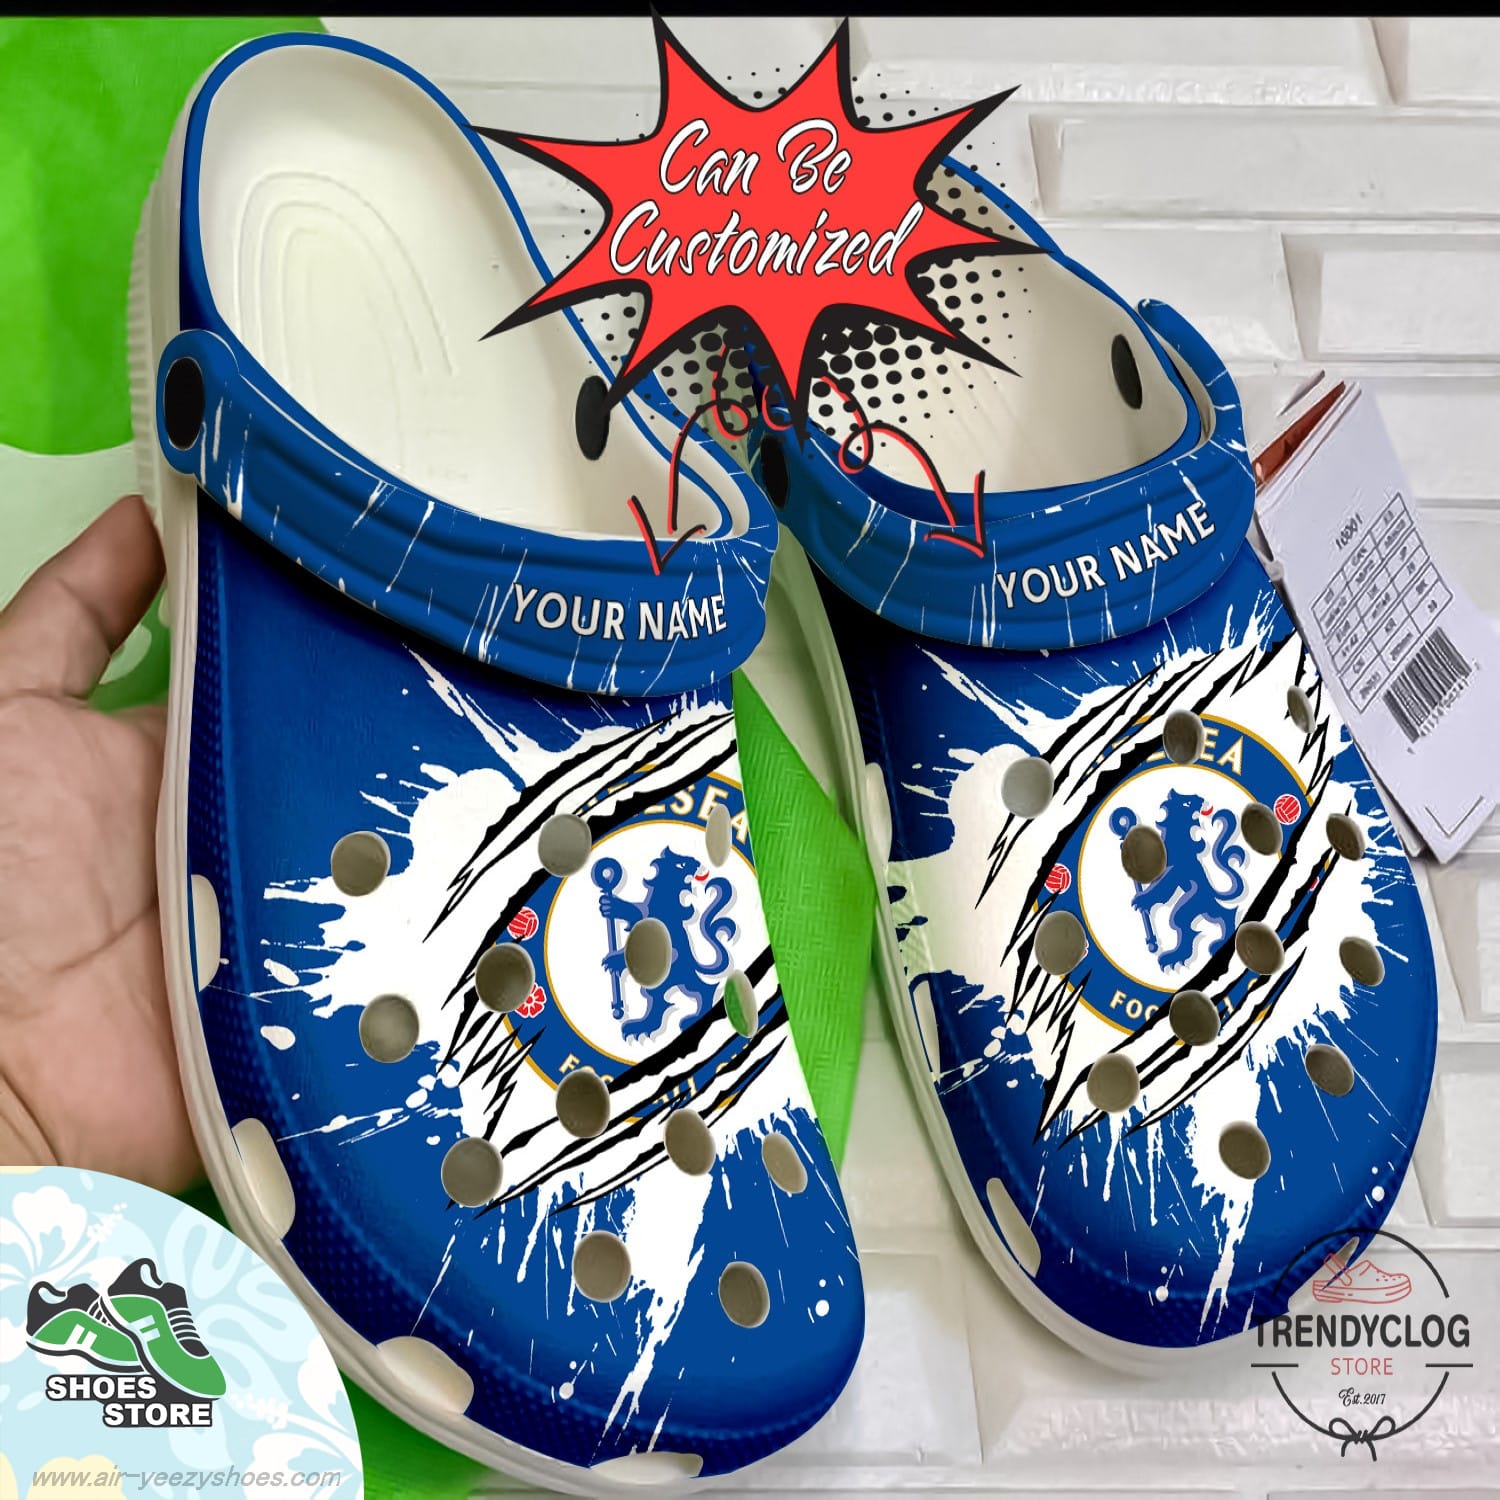 Personalized Chelsea Ripped Claw Clogs Soccer Crocs Shoes